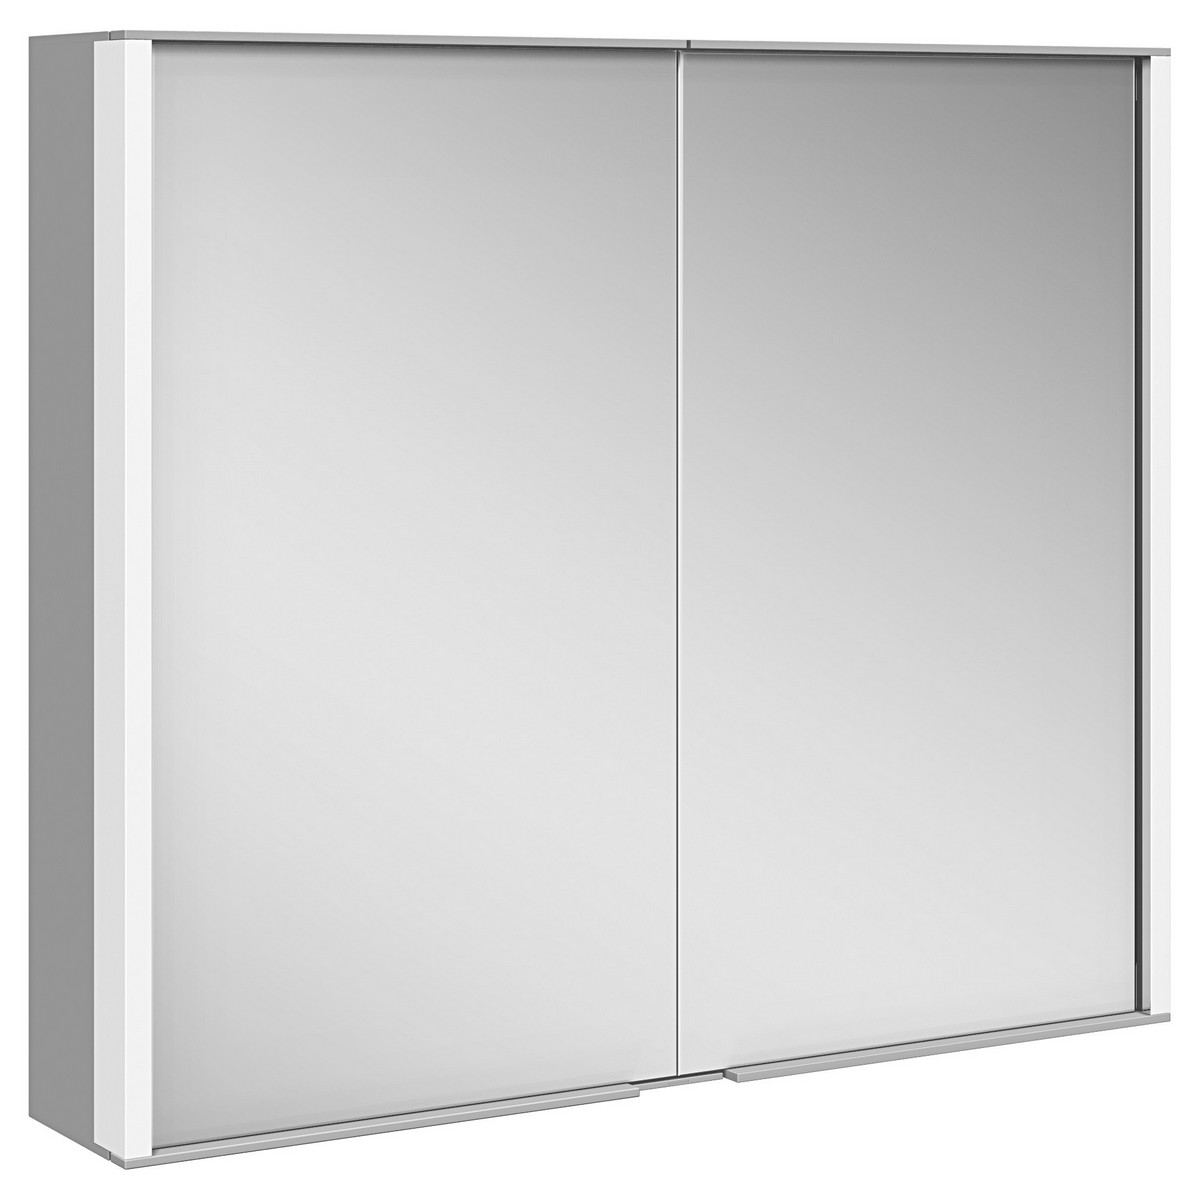 KEUCO 12802171351 ROYAL MATCH 31 1/2 W X 6 1/4 D X 27 1/2 H INCH 2-DOOR 3000K LED WALL MOUNTED MIRROR MEDICINE CABINET IN ALUMINUM